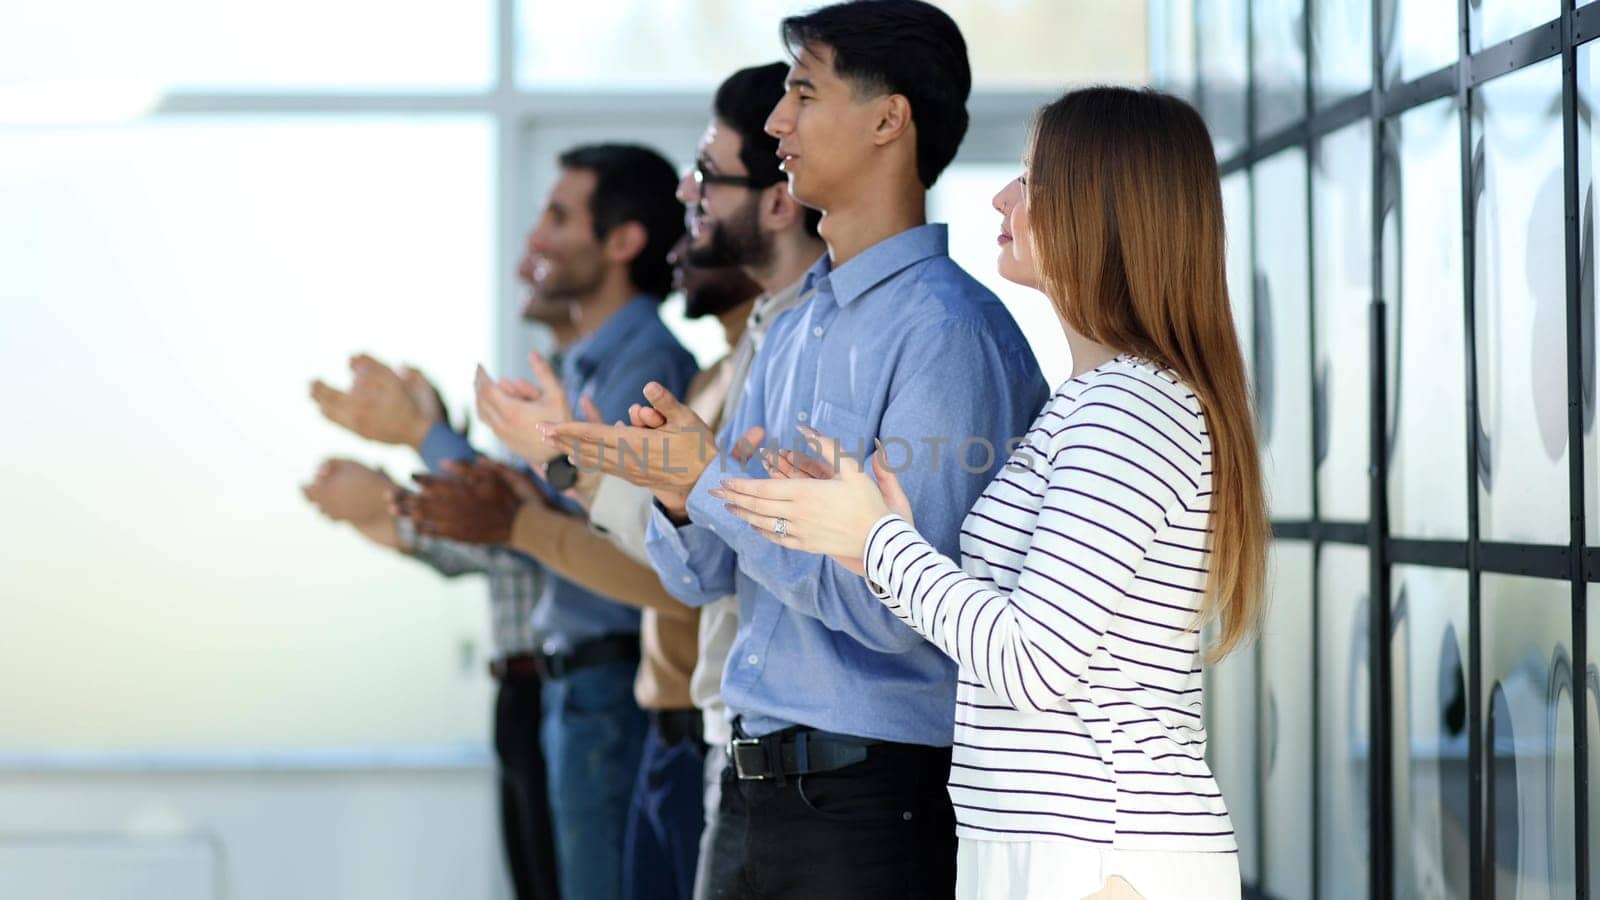 A group of people standing in a row clapping their hands by Prosto